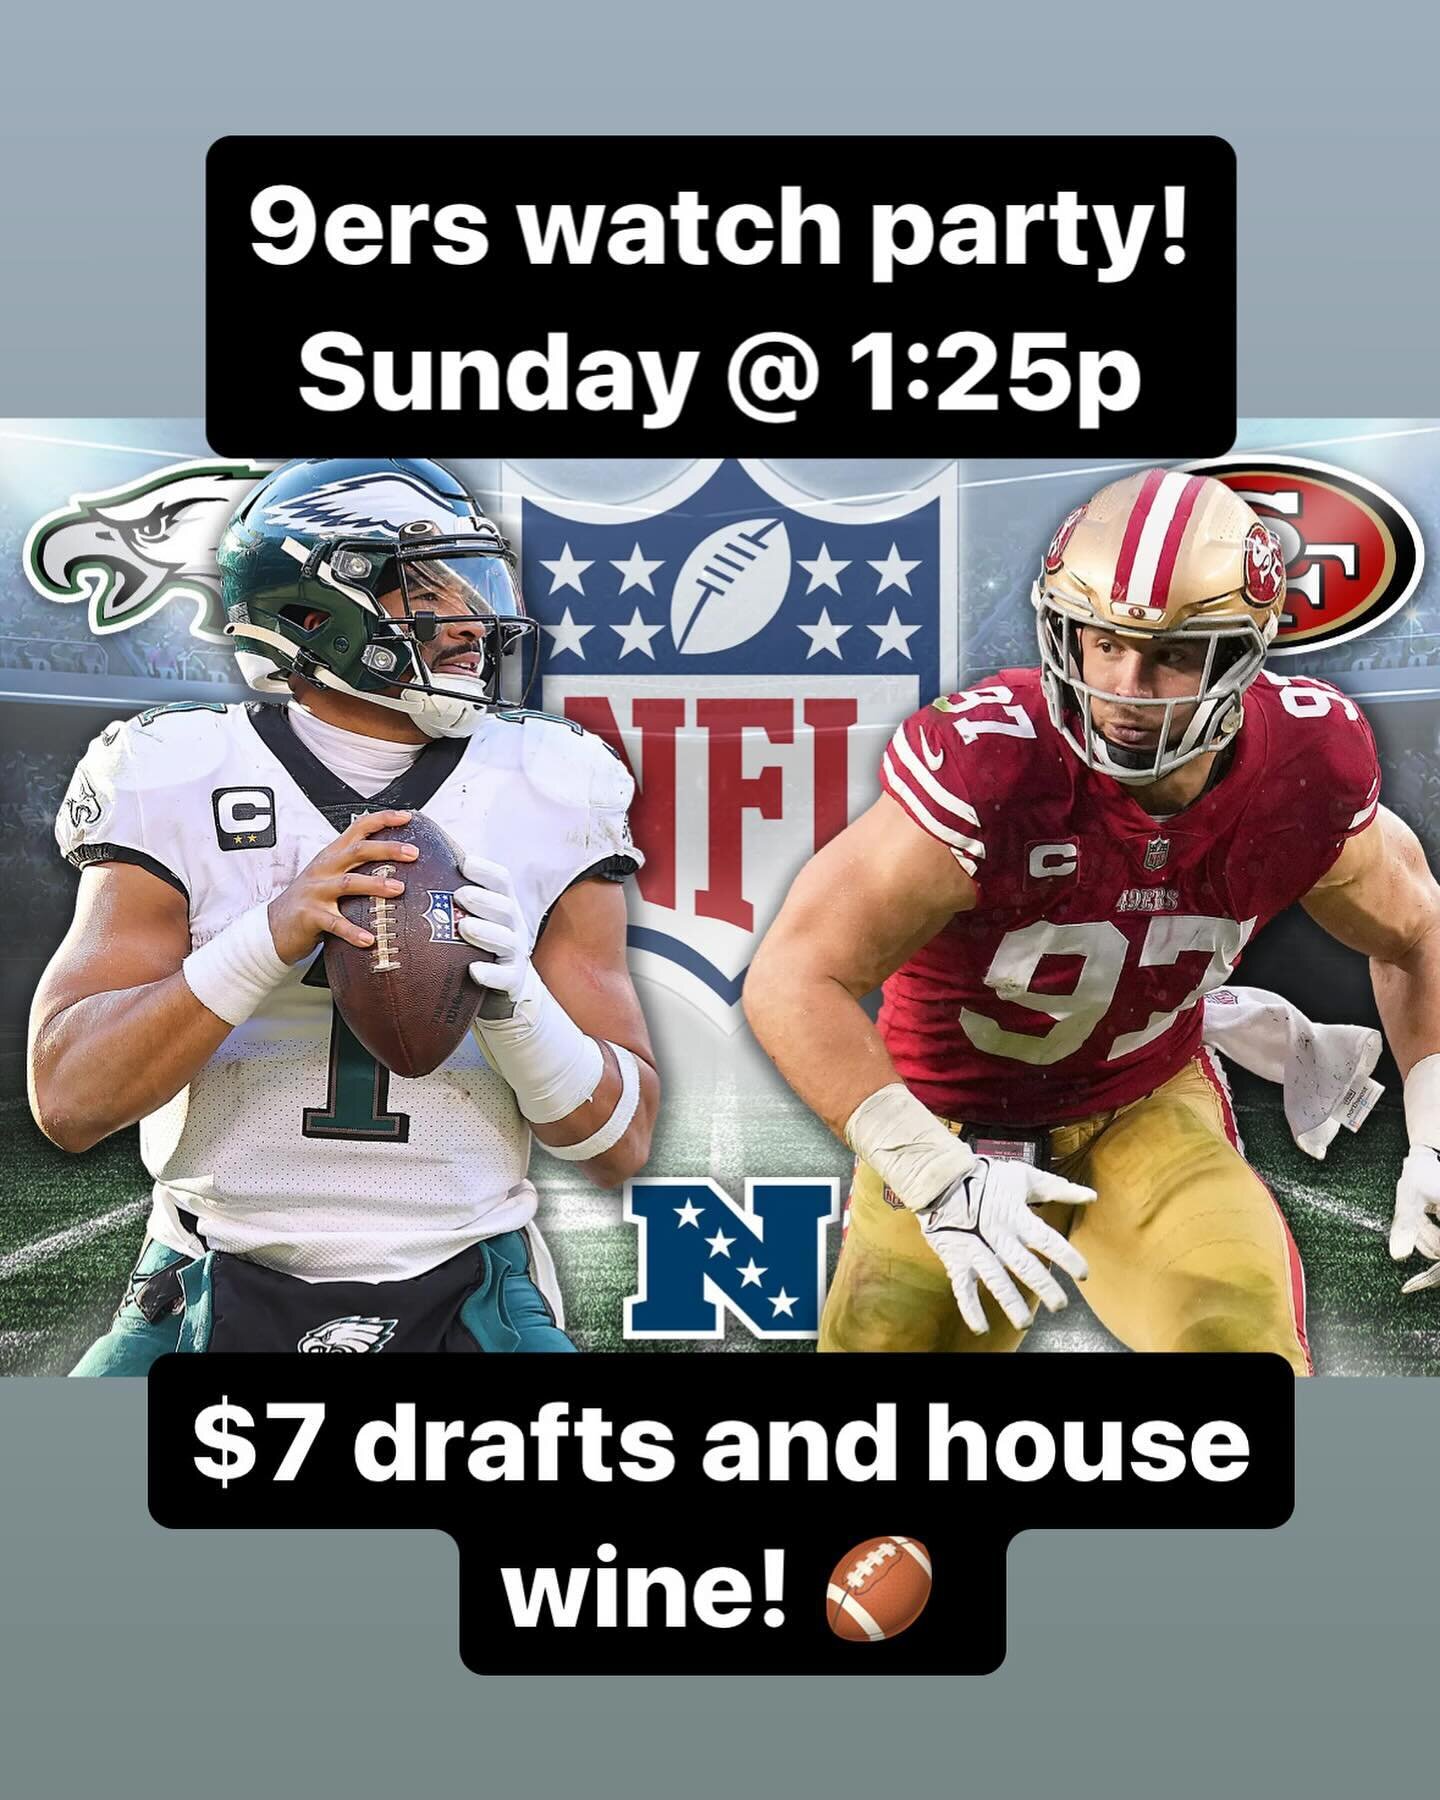 Join us for the game!! 🏈 Come rally for the niners with great food &amp; company! 🍻 #paradisebeachgrillecapitola #49ers #footballsunday #capitolavi&ntilde;lage